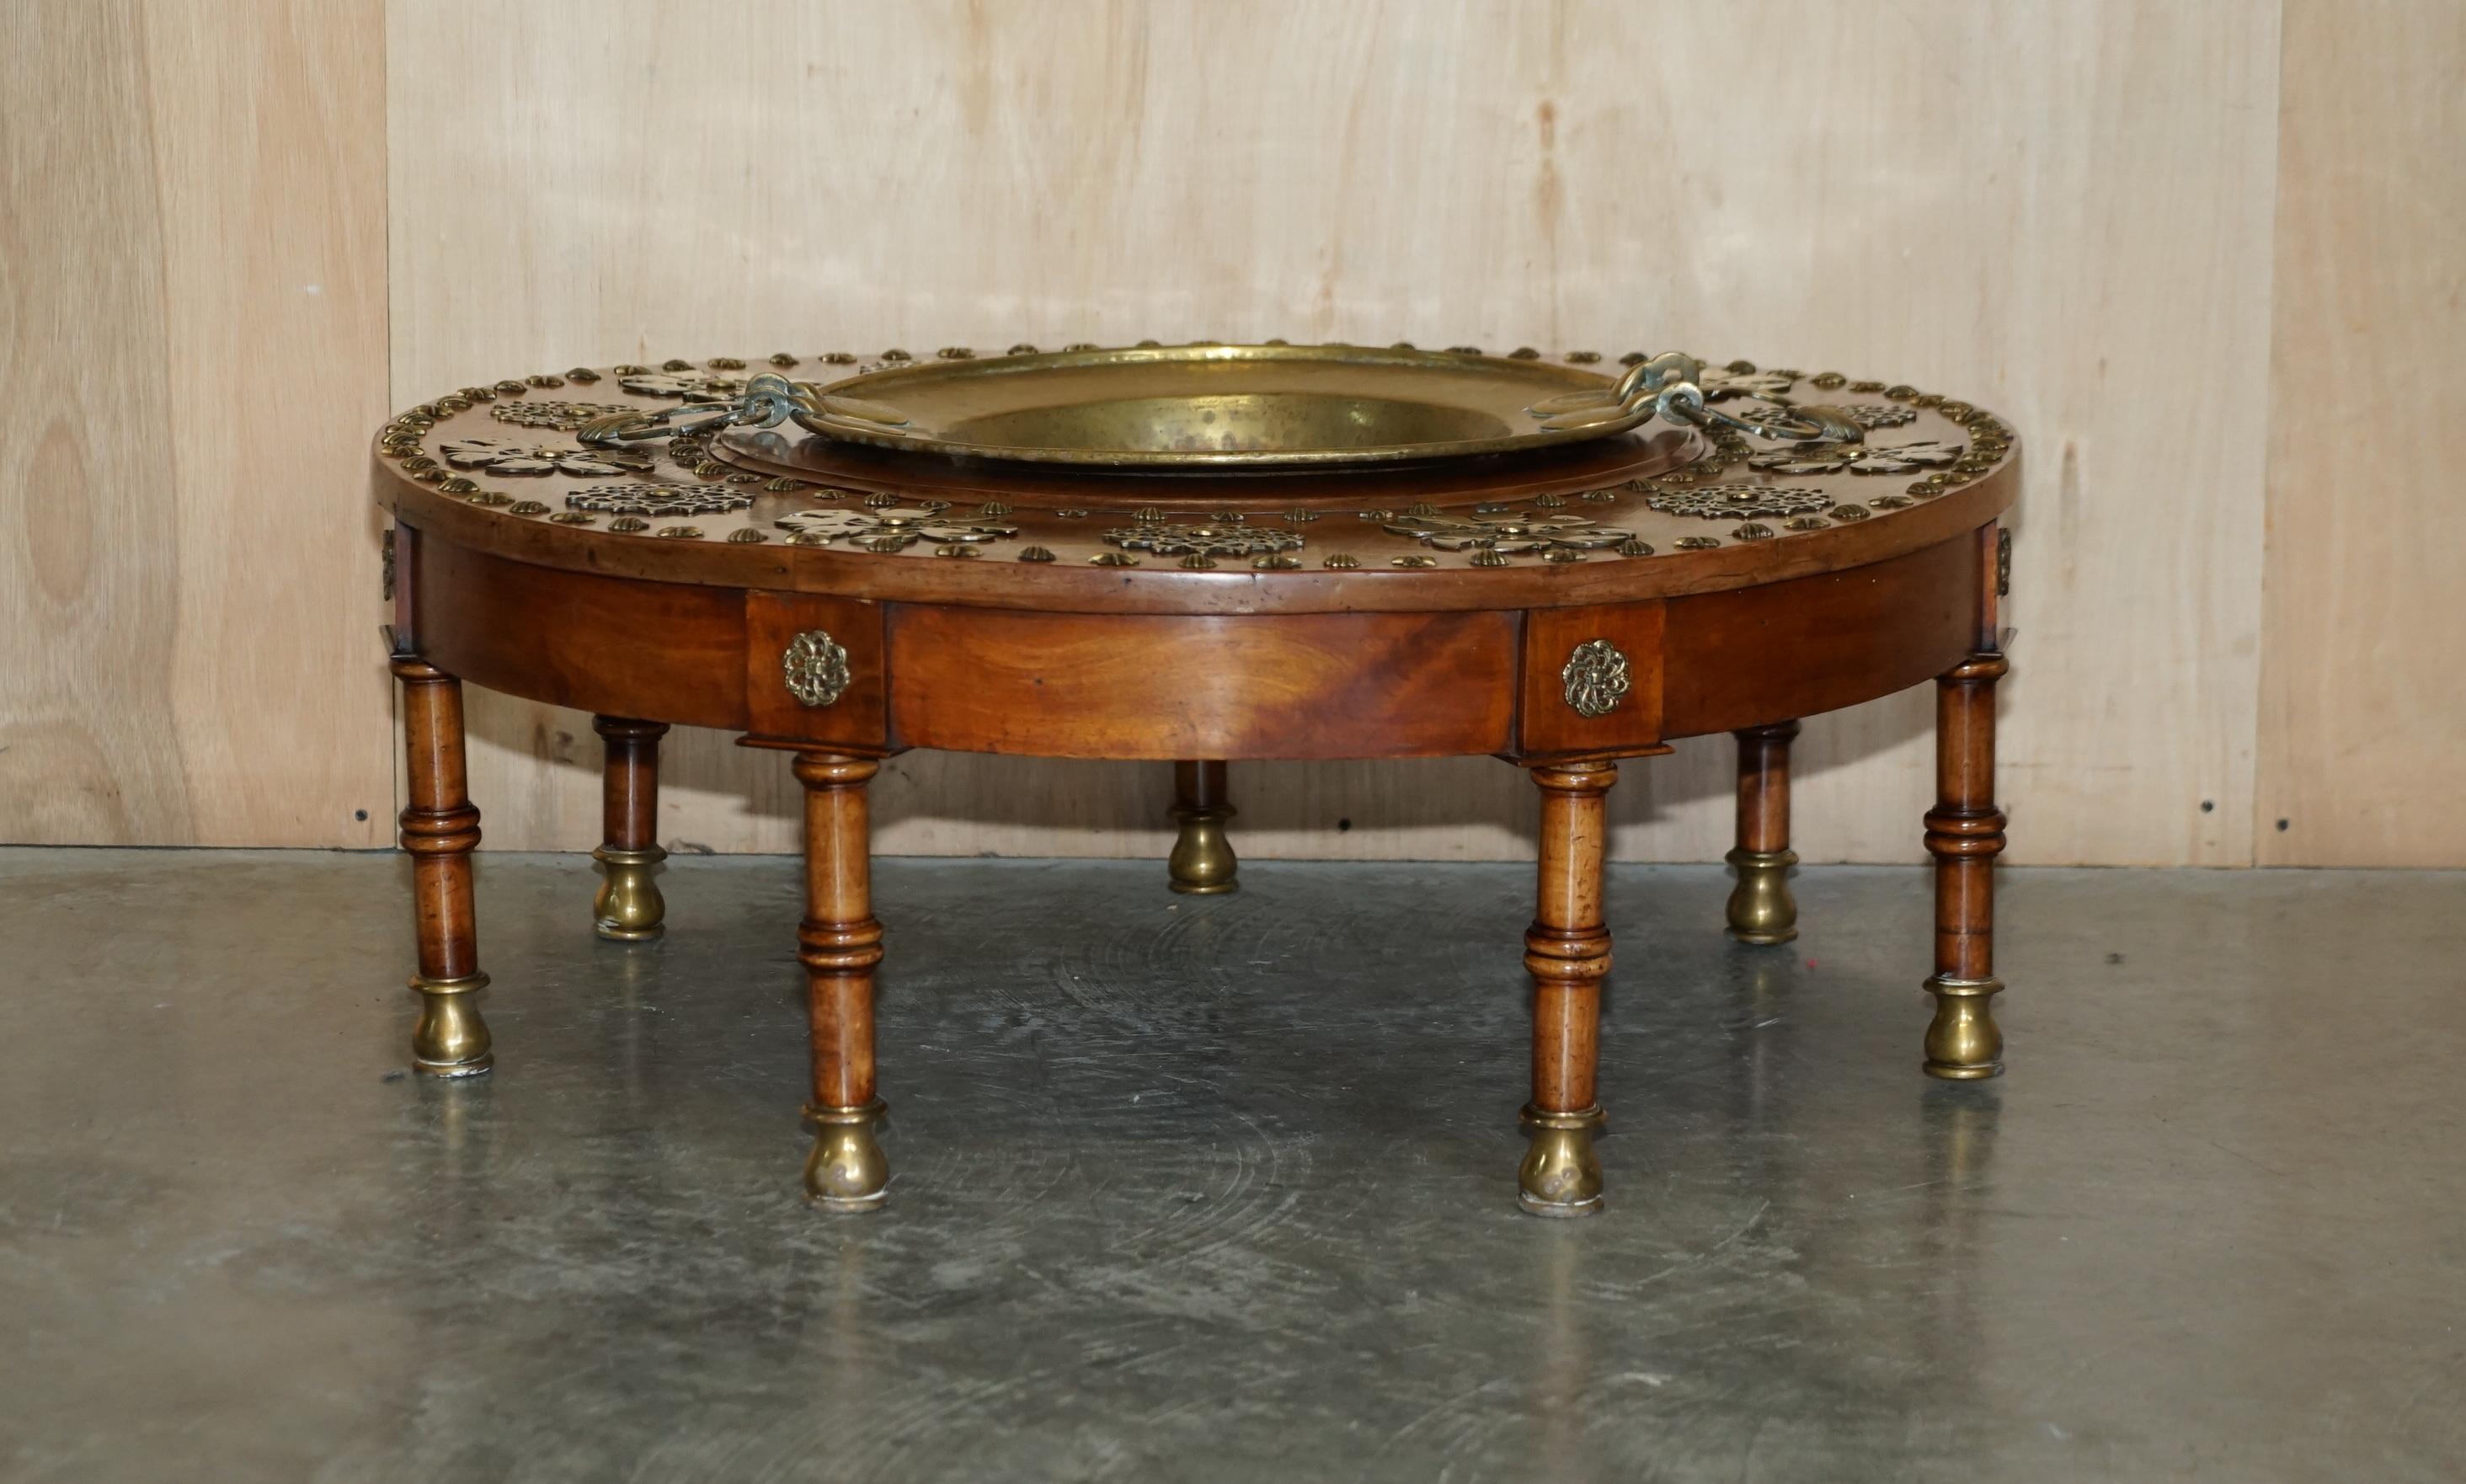 We are delighted to offer for sale this lovely Rare Antique Spanish Early 19th Century 